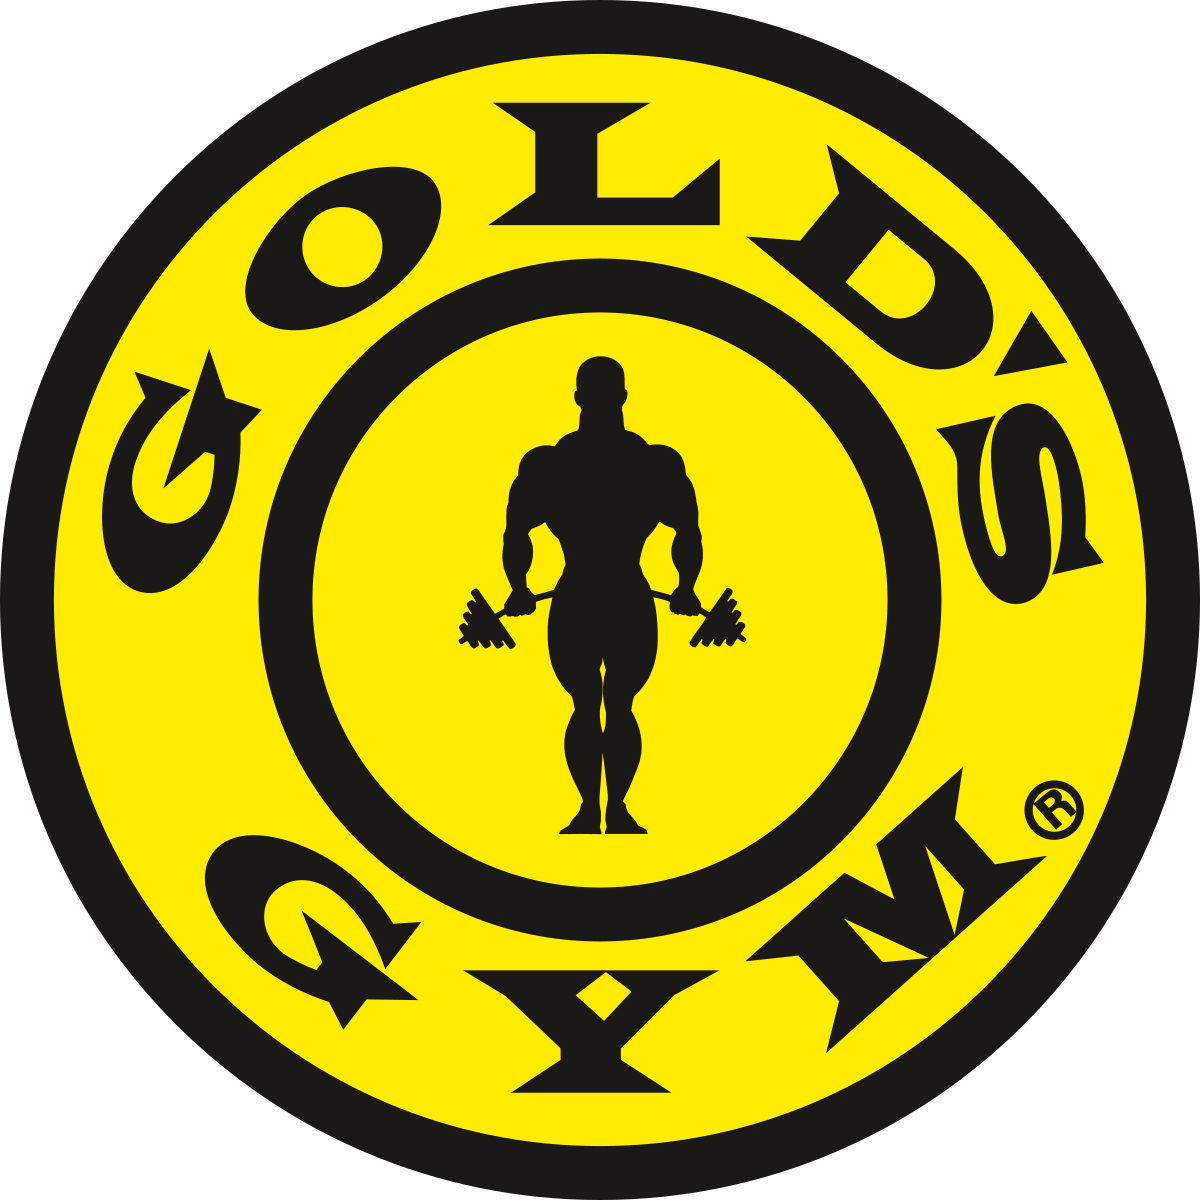 Gold's Gym files for bankruptcy, Business Insider reports